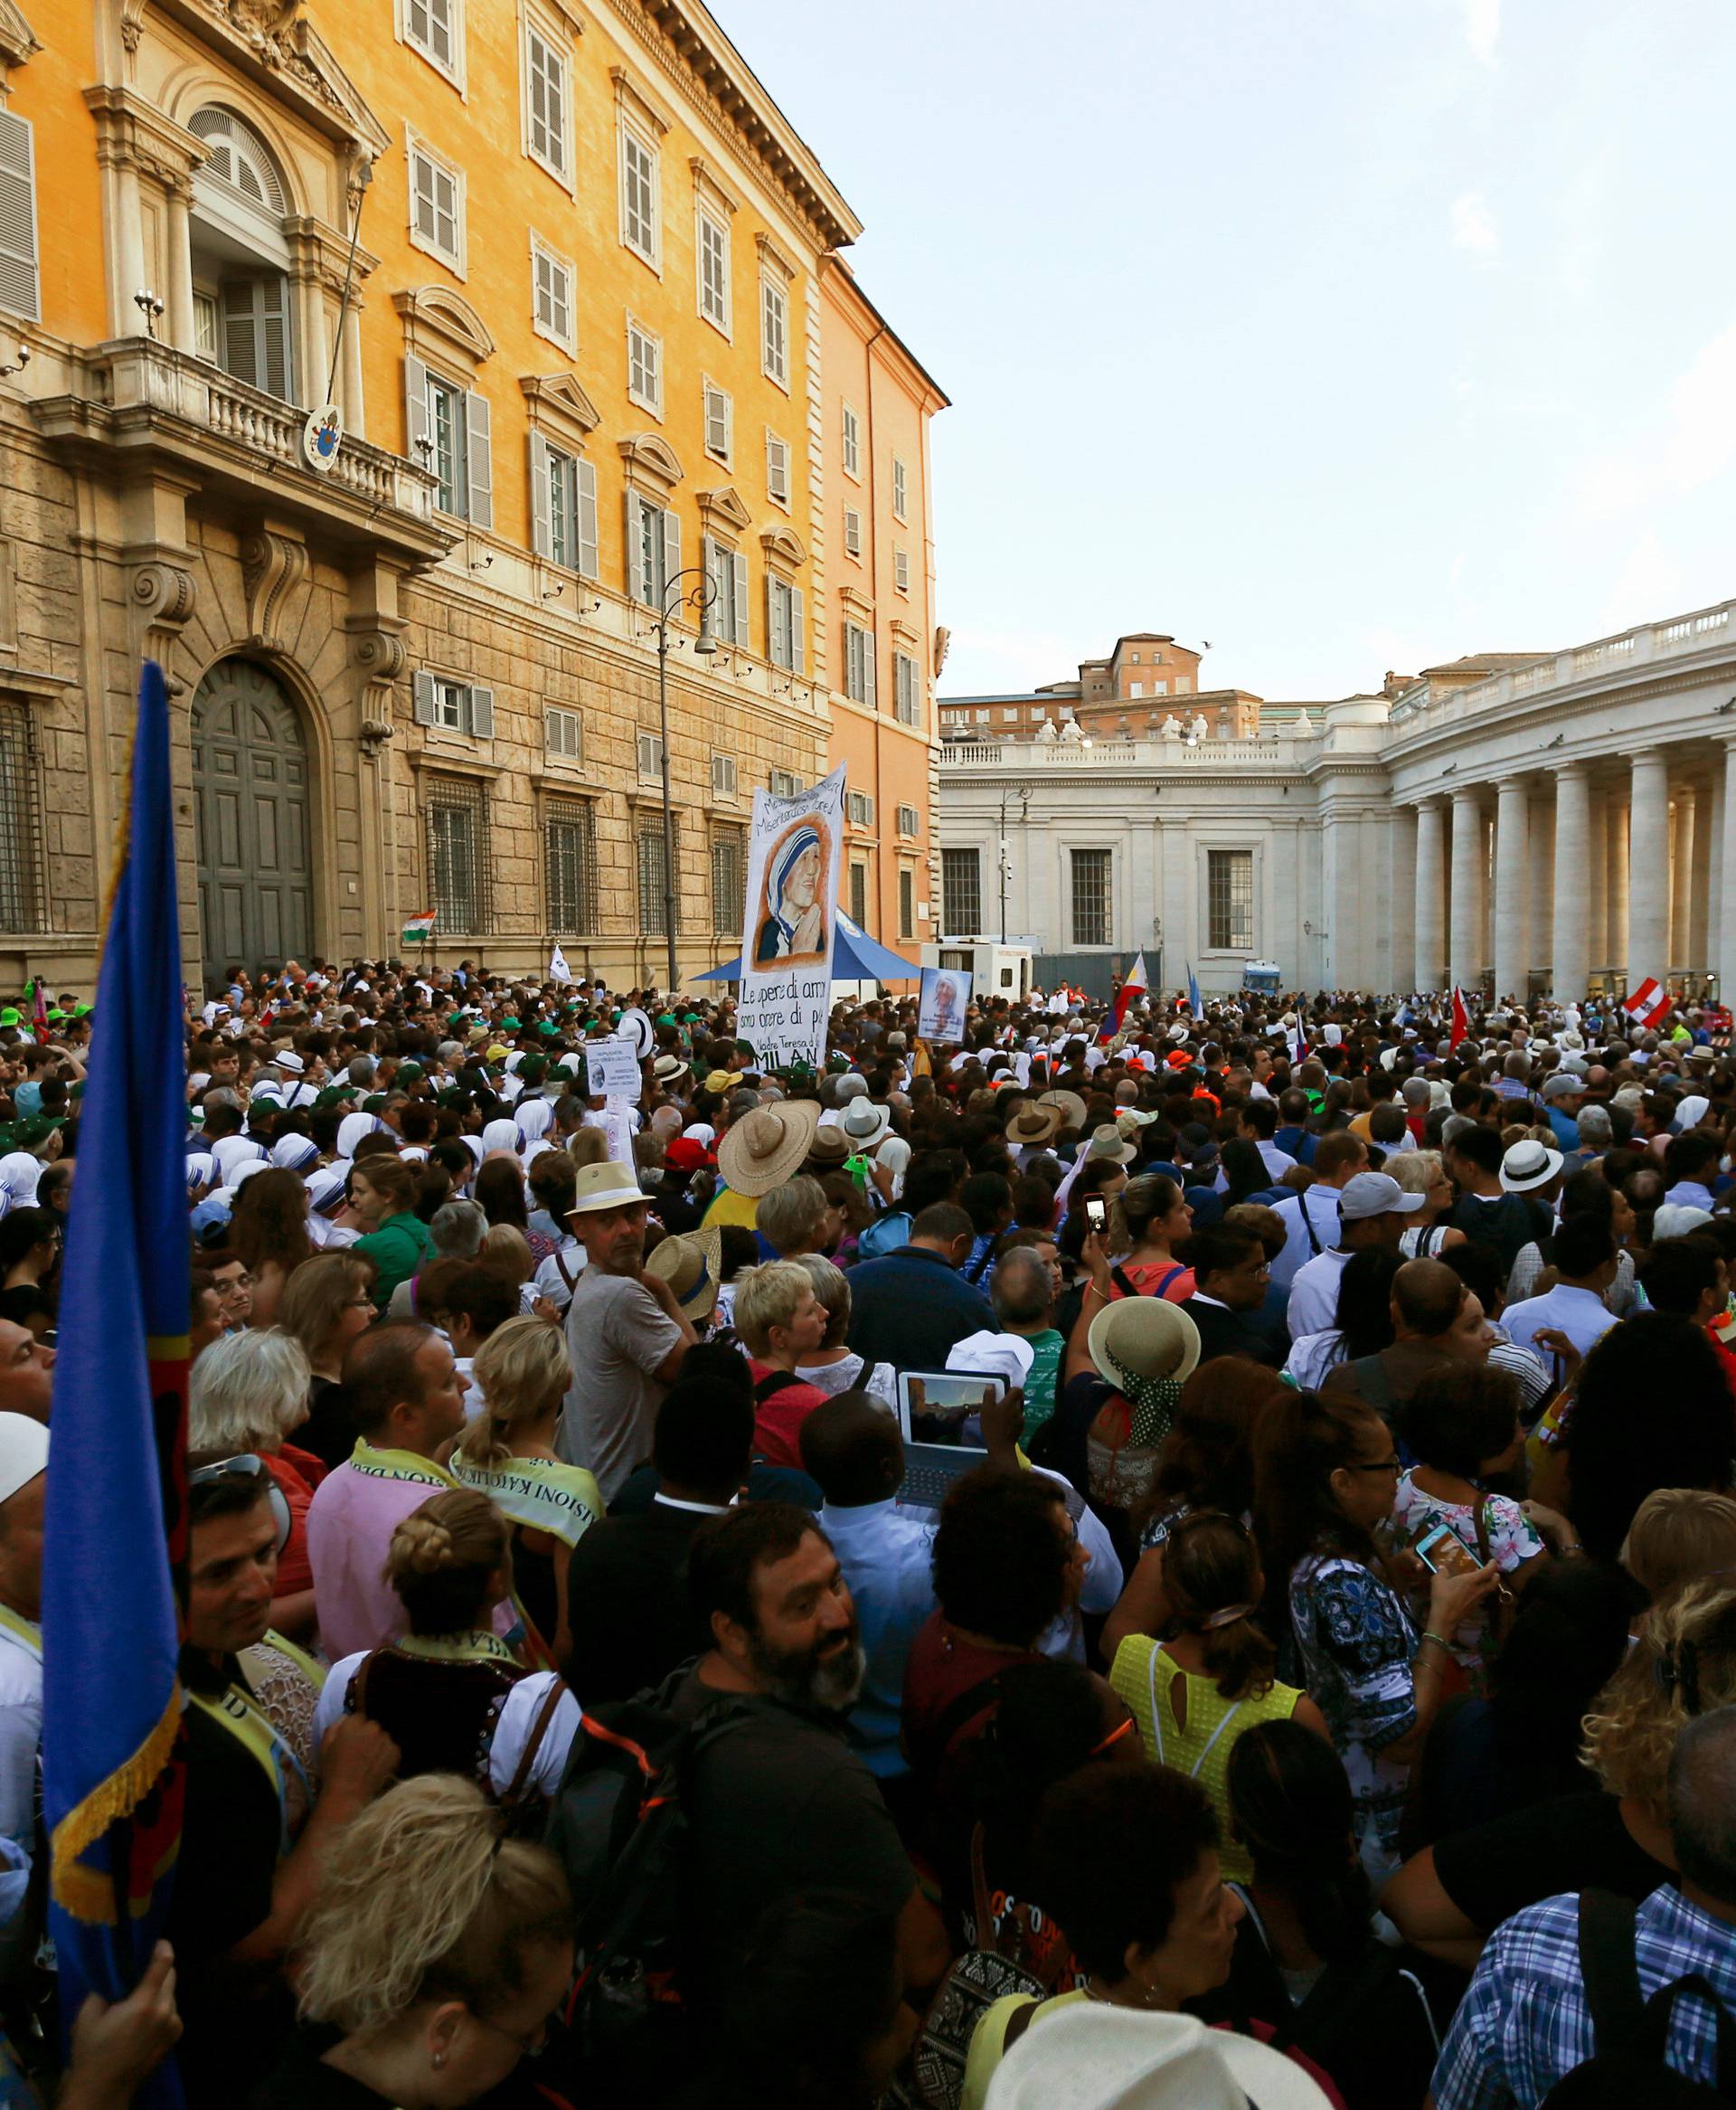 Crowds arrive to attend a mass celebrated by Pope Francis for the canonisation of Mother Teresa of Calcutta in Saint Peter's Square at the Vatican